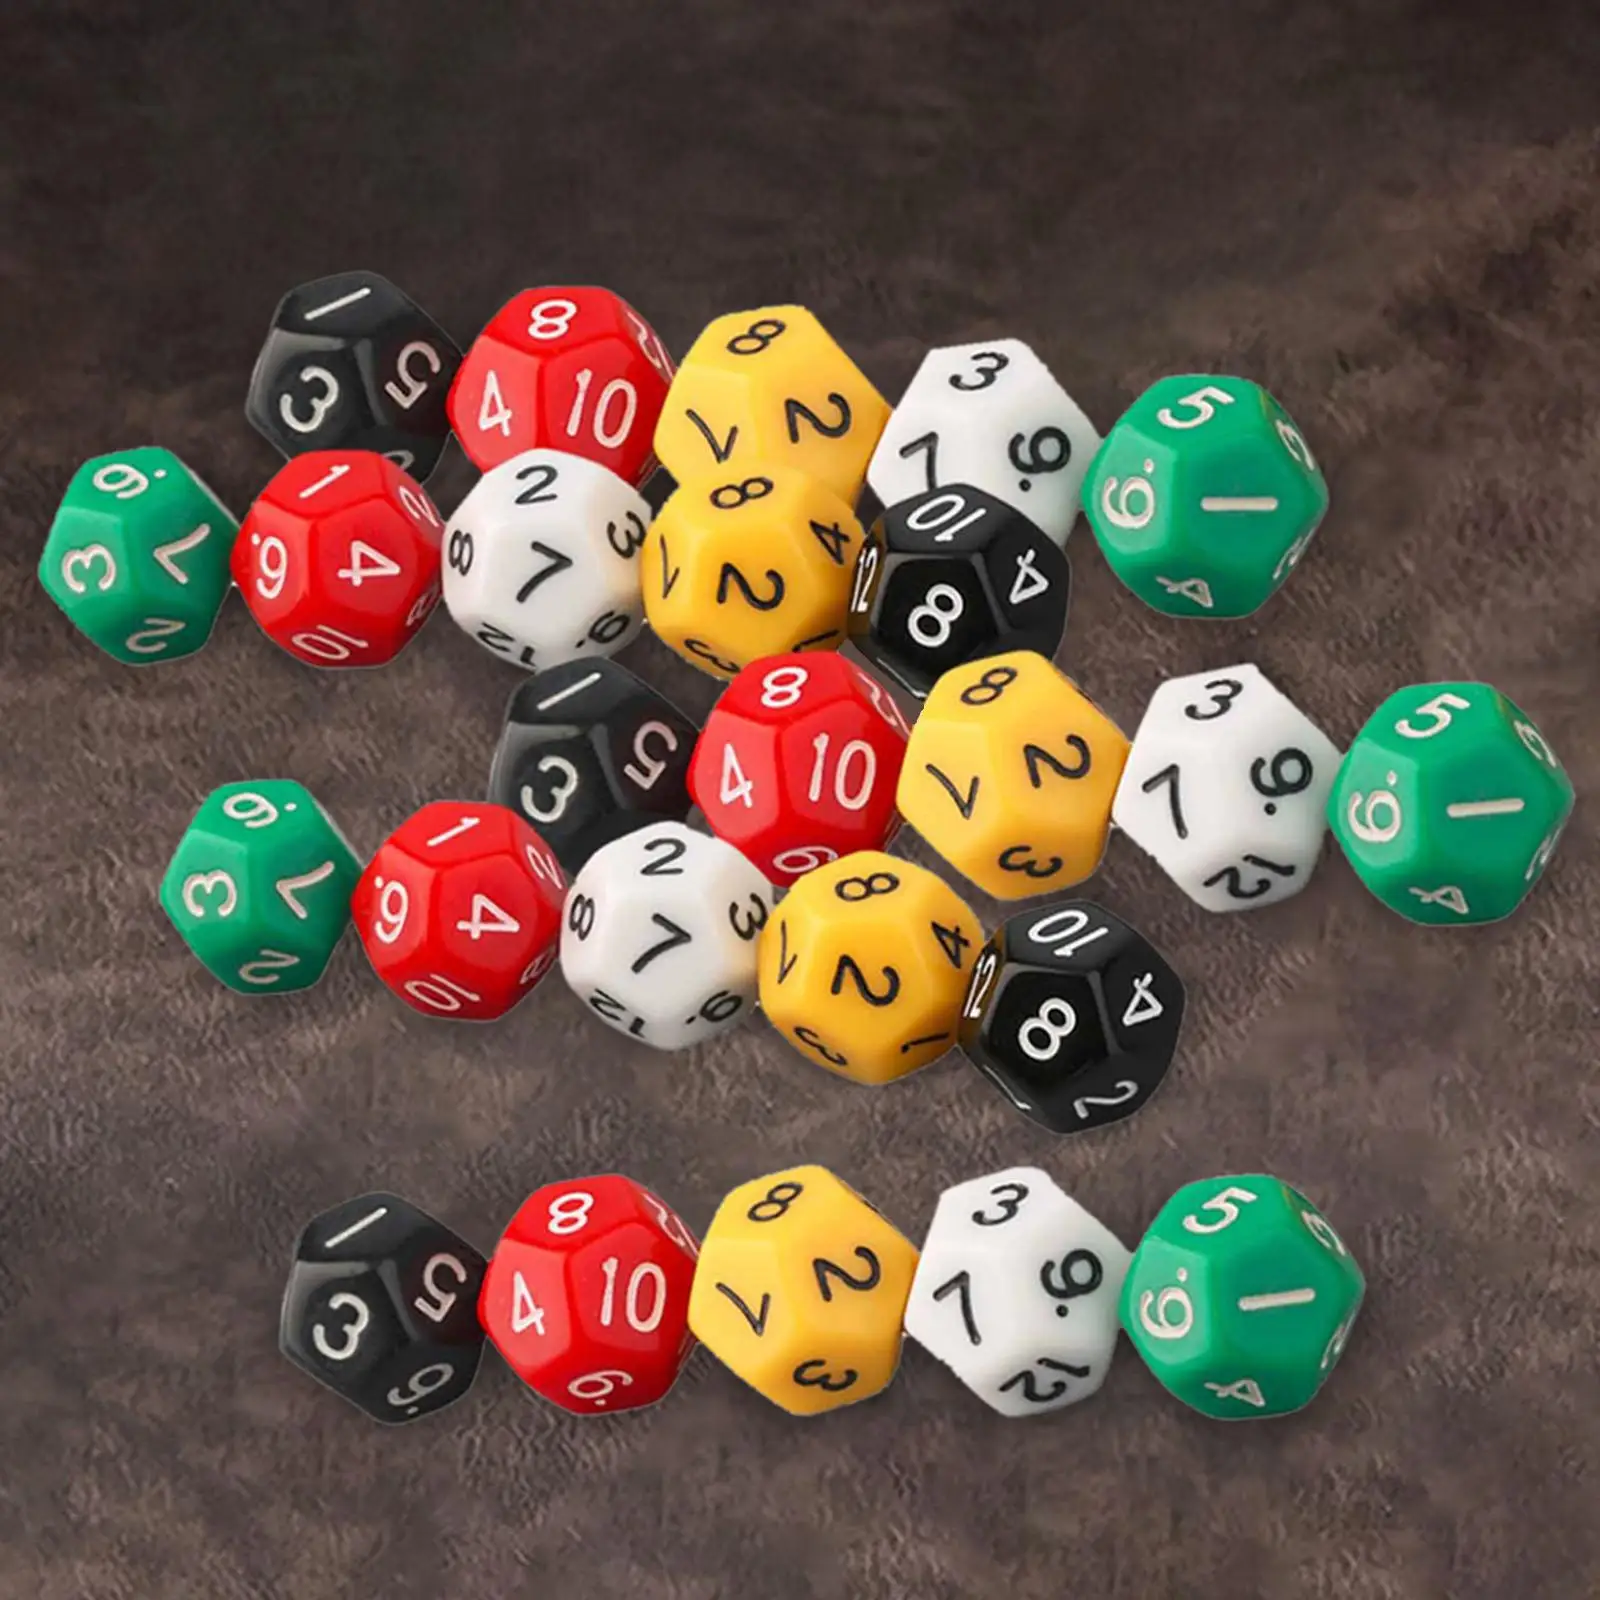 25x Polyhedral Dice Collectibles Acrylic Party Accessories Entertainment Toy Crafts Board Game Multisided Dice for Role Playing